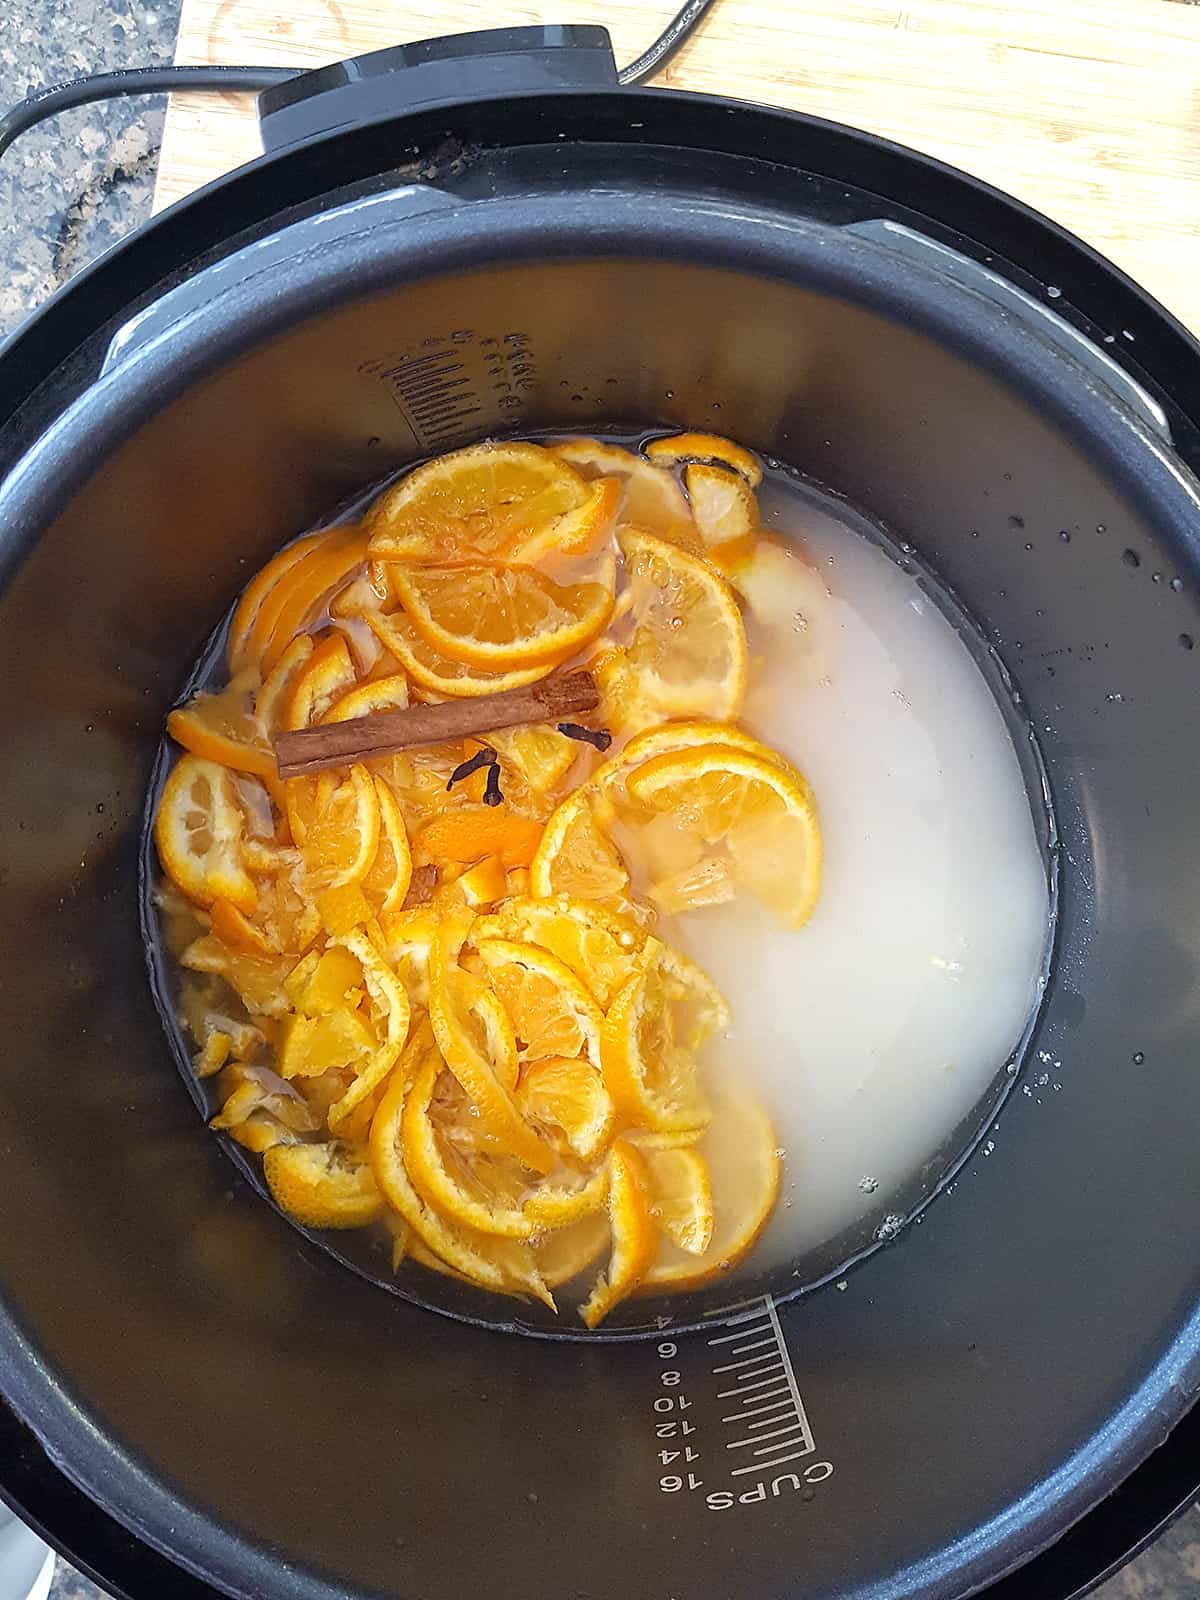 Oranges, sugar, water, and spices inside the pressure cooker.